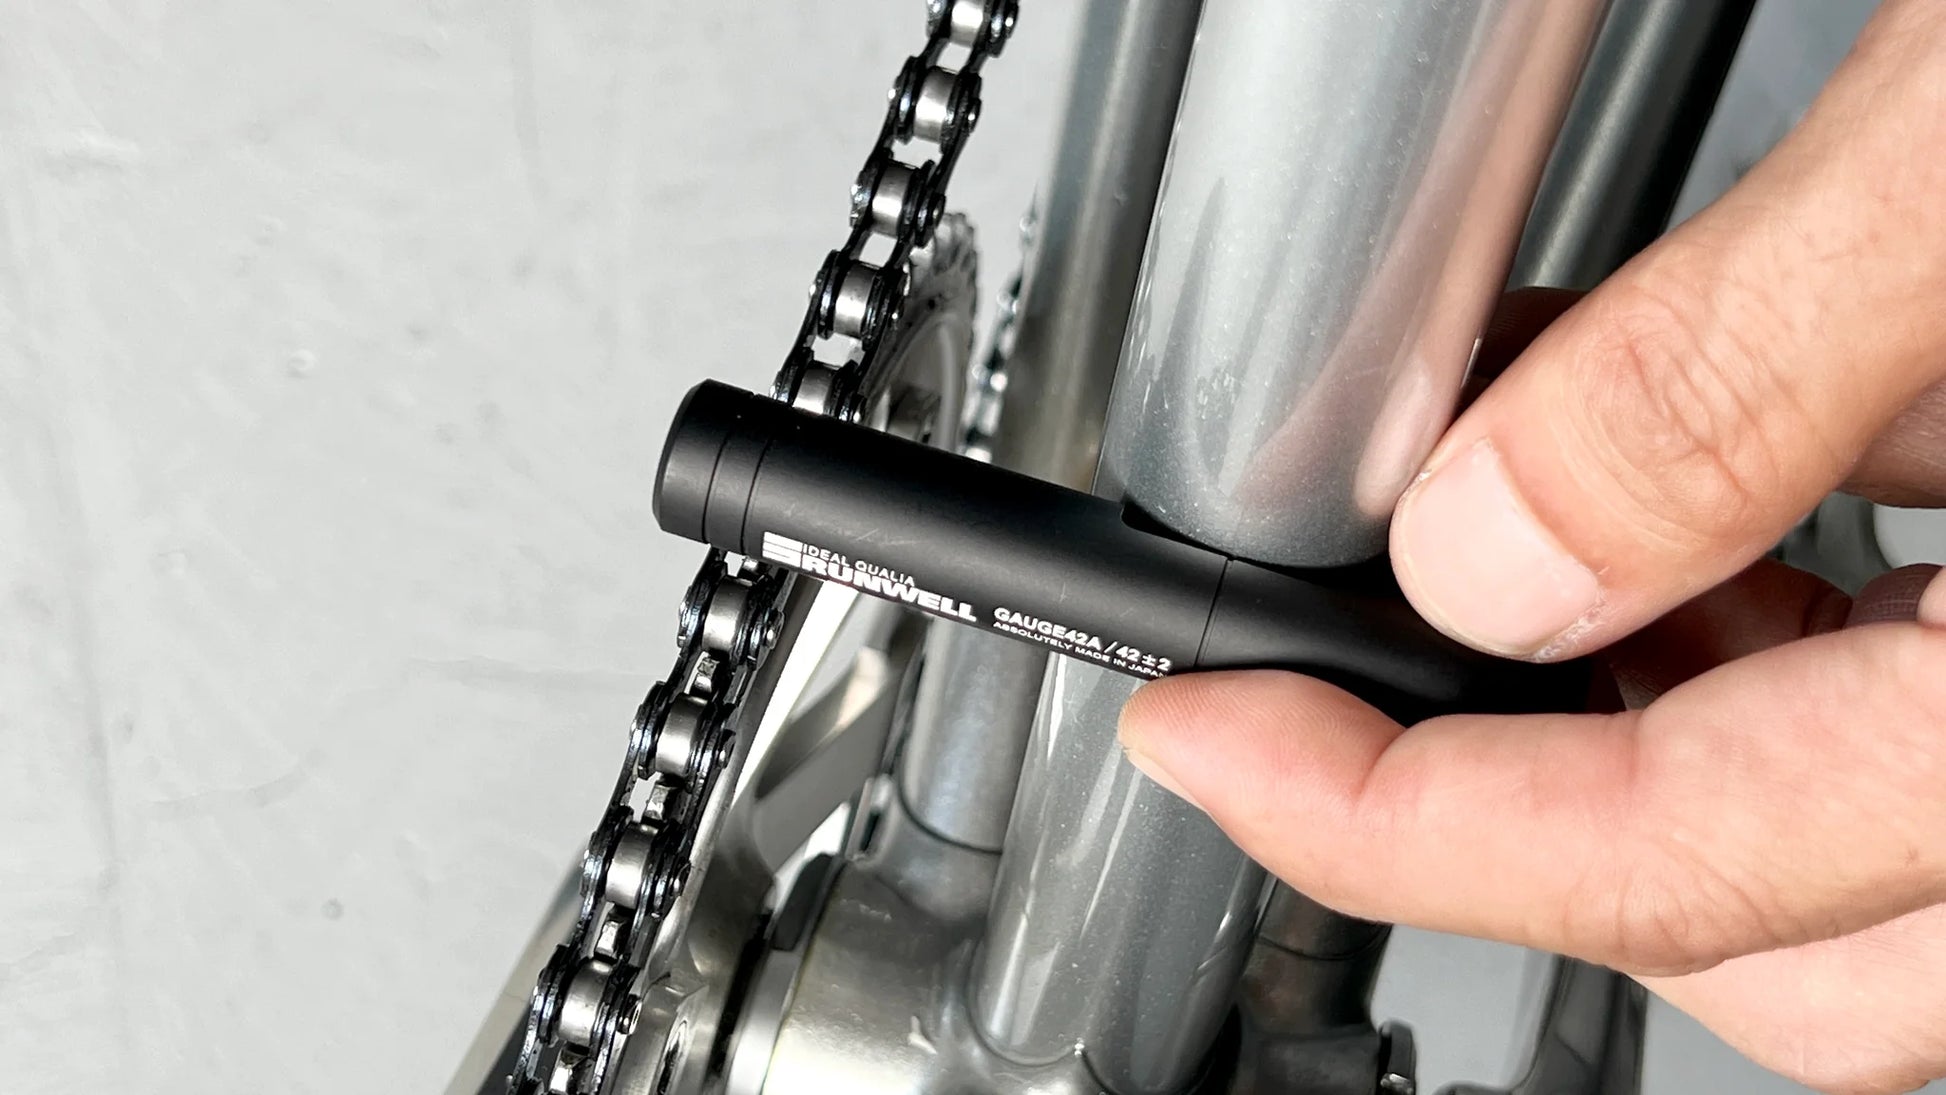 Product photo of a track chainline checker, in use on an NJS bicycle frame